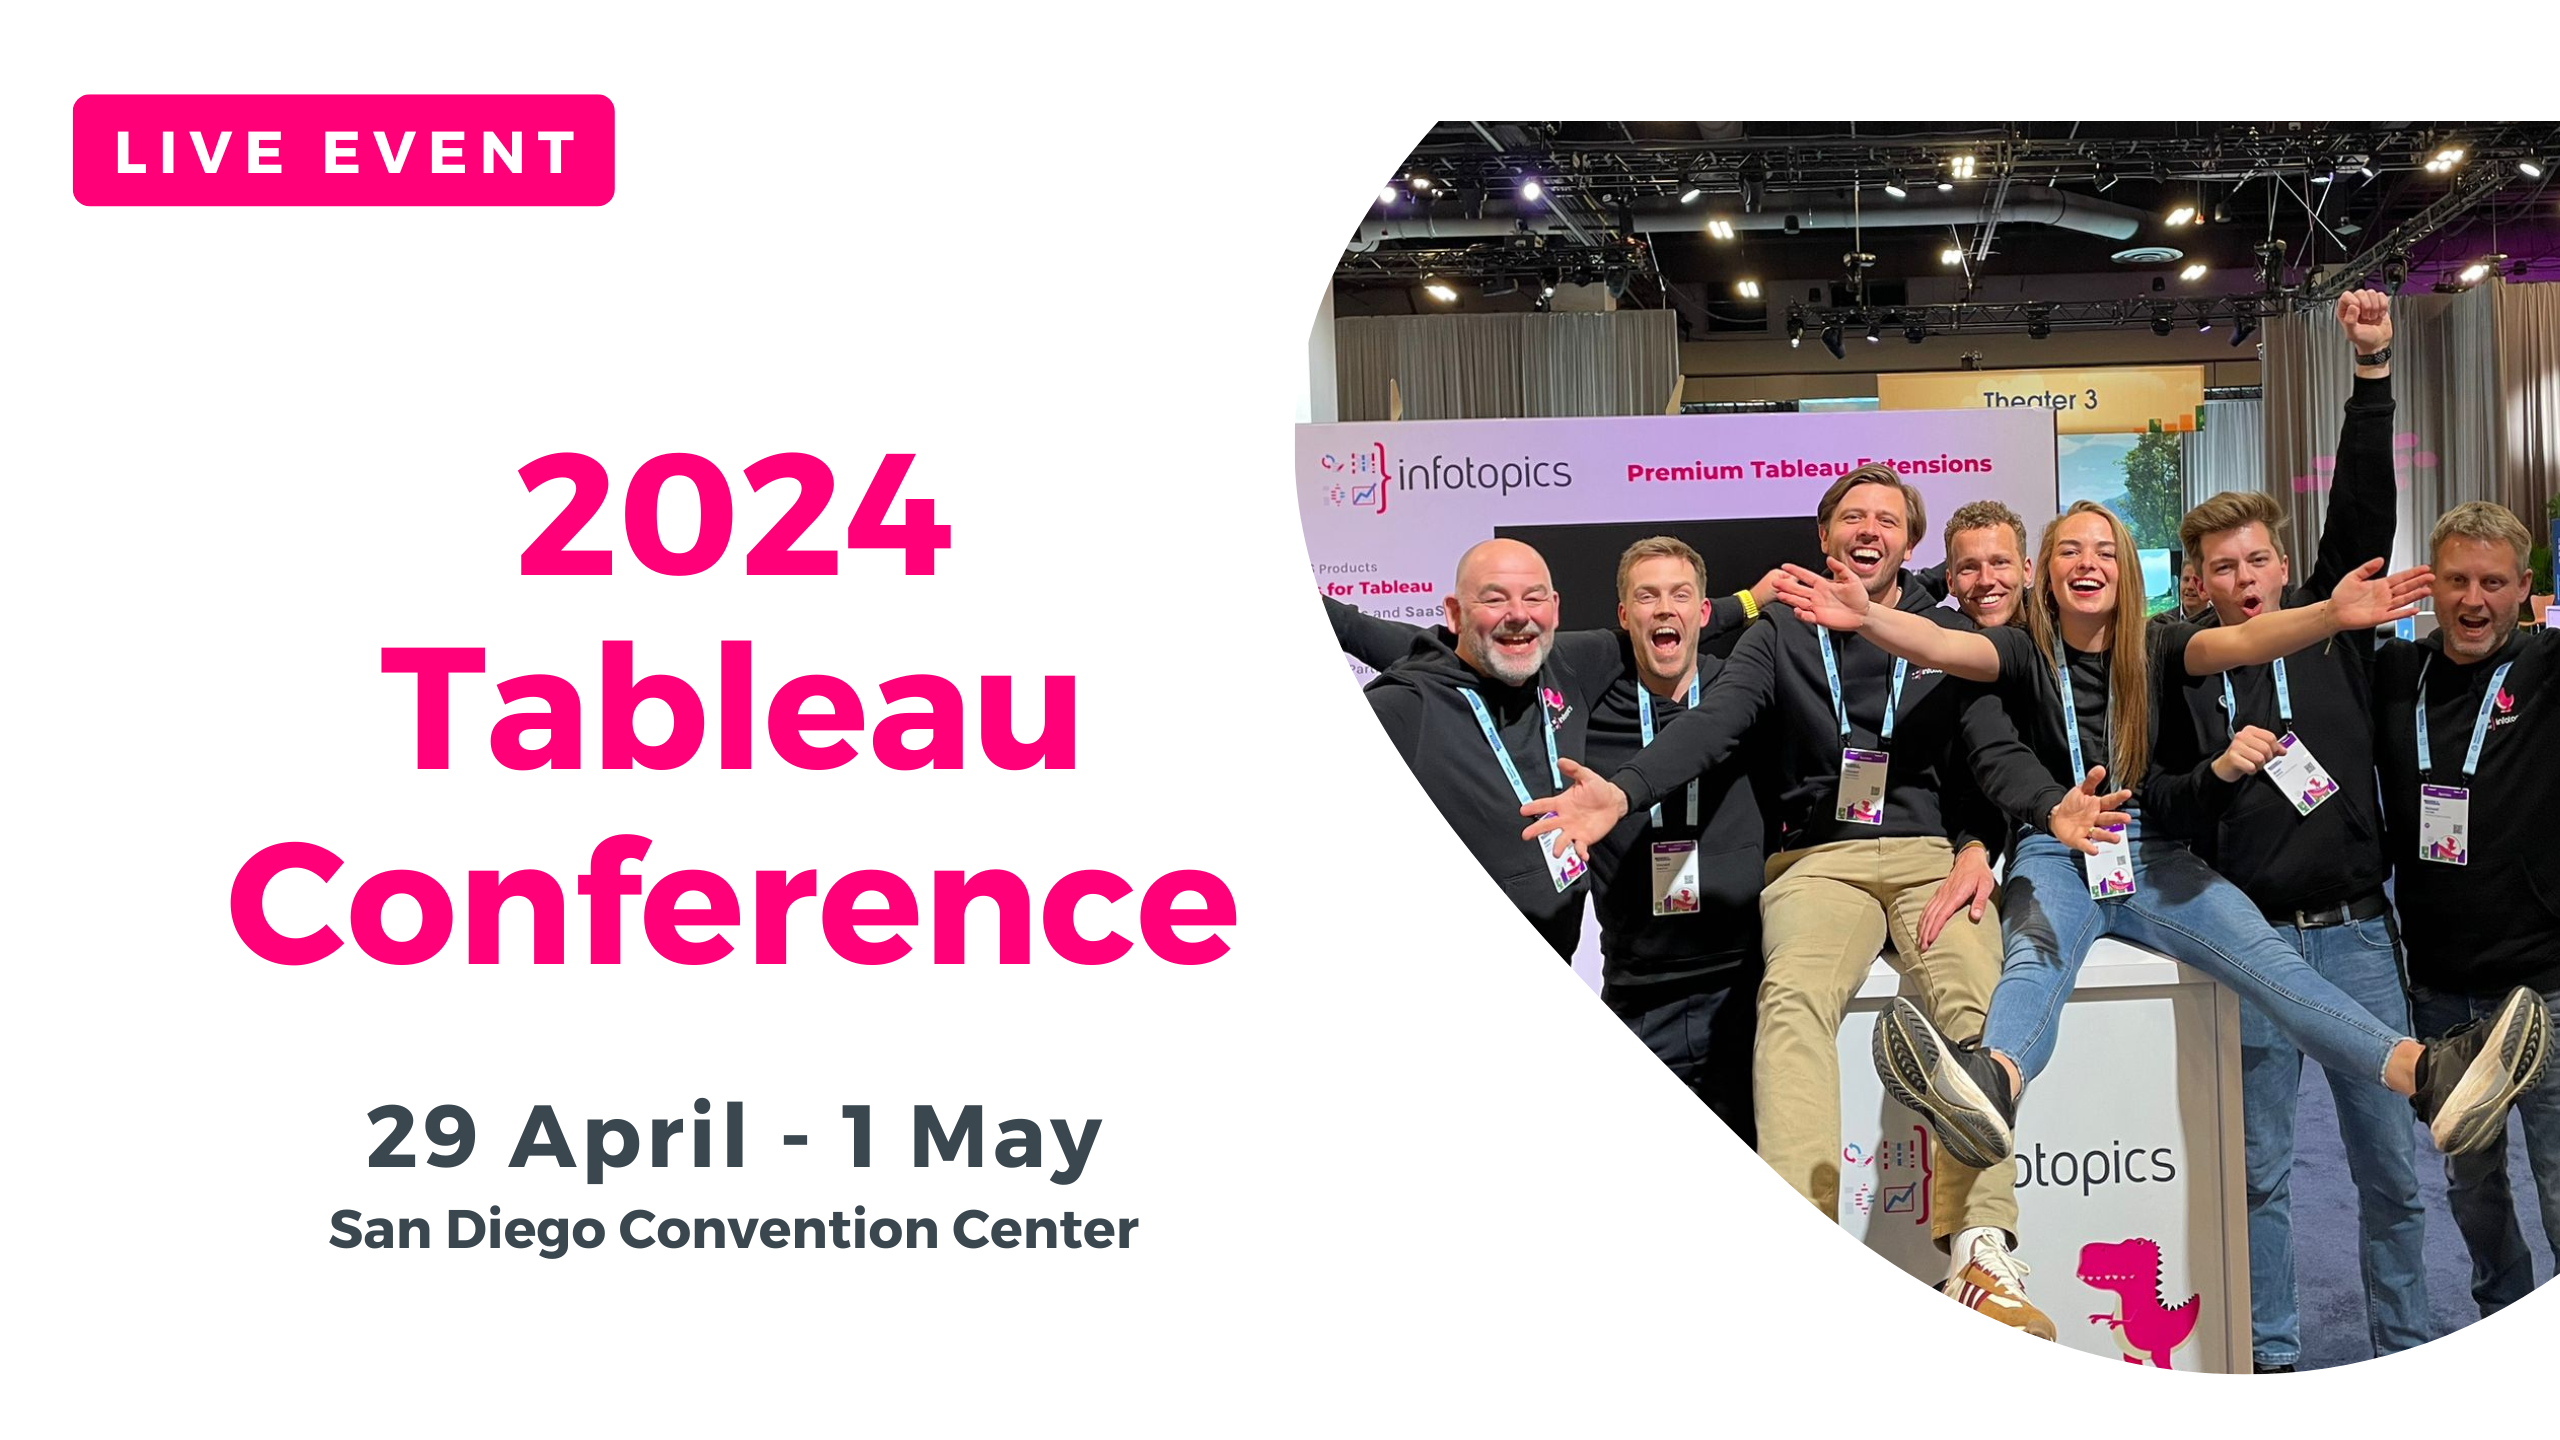 Tableau Conference 2024 